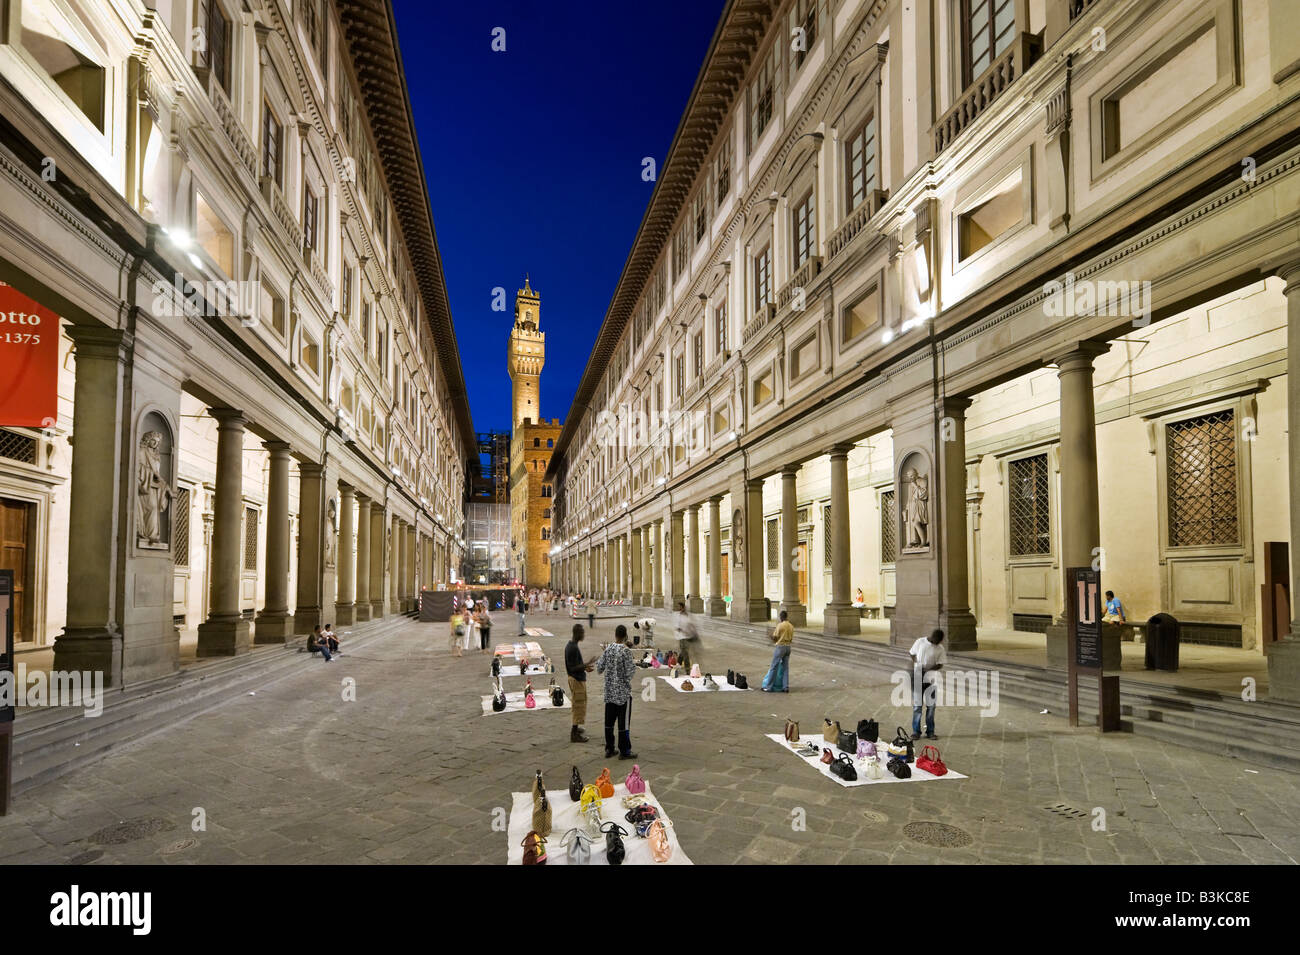 Illegal street sellers outside the Uffizi Gallery at night with the Palazzo Vecchio in the distance, Florence, Tuscany, Italy Stock Photo